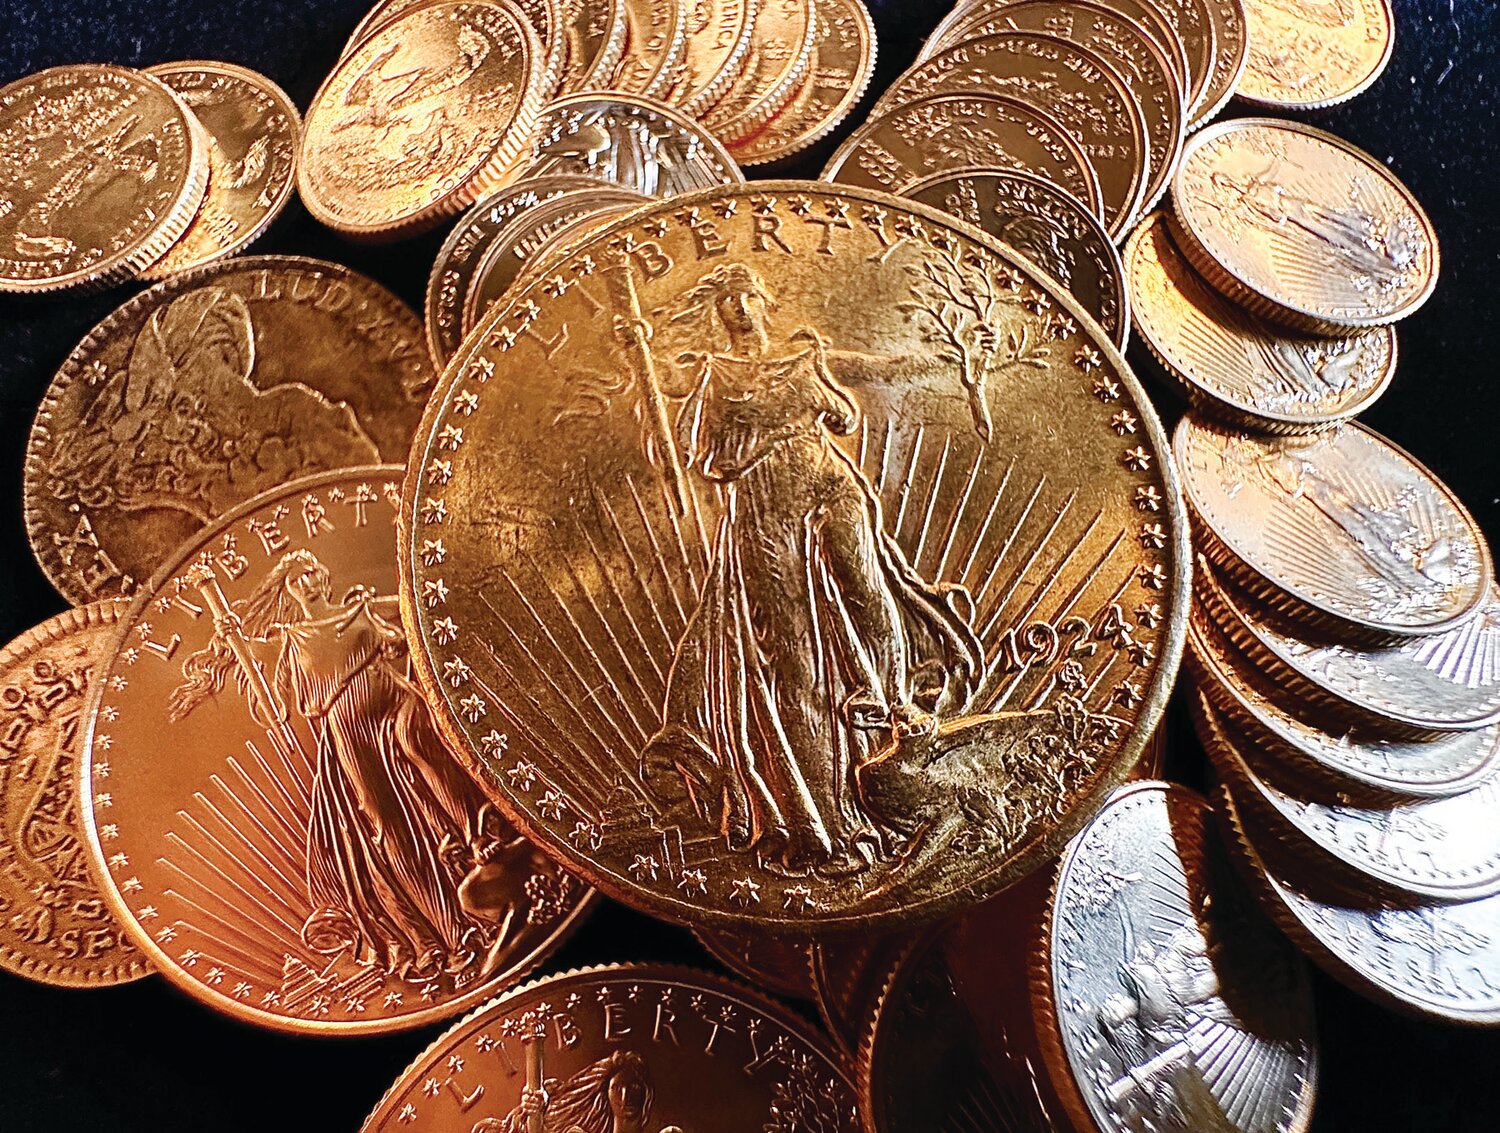 Located on Sellersville’s Main Street, Bucks County Rare Coins & Metals deals in everything from pirate doubloons and U.S. gold coins to Indian head pennies, foreign coins, silver dollars, bullion, and scrap jewelry.